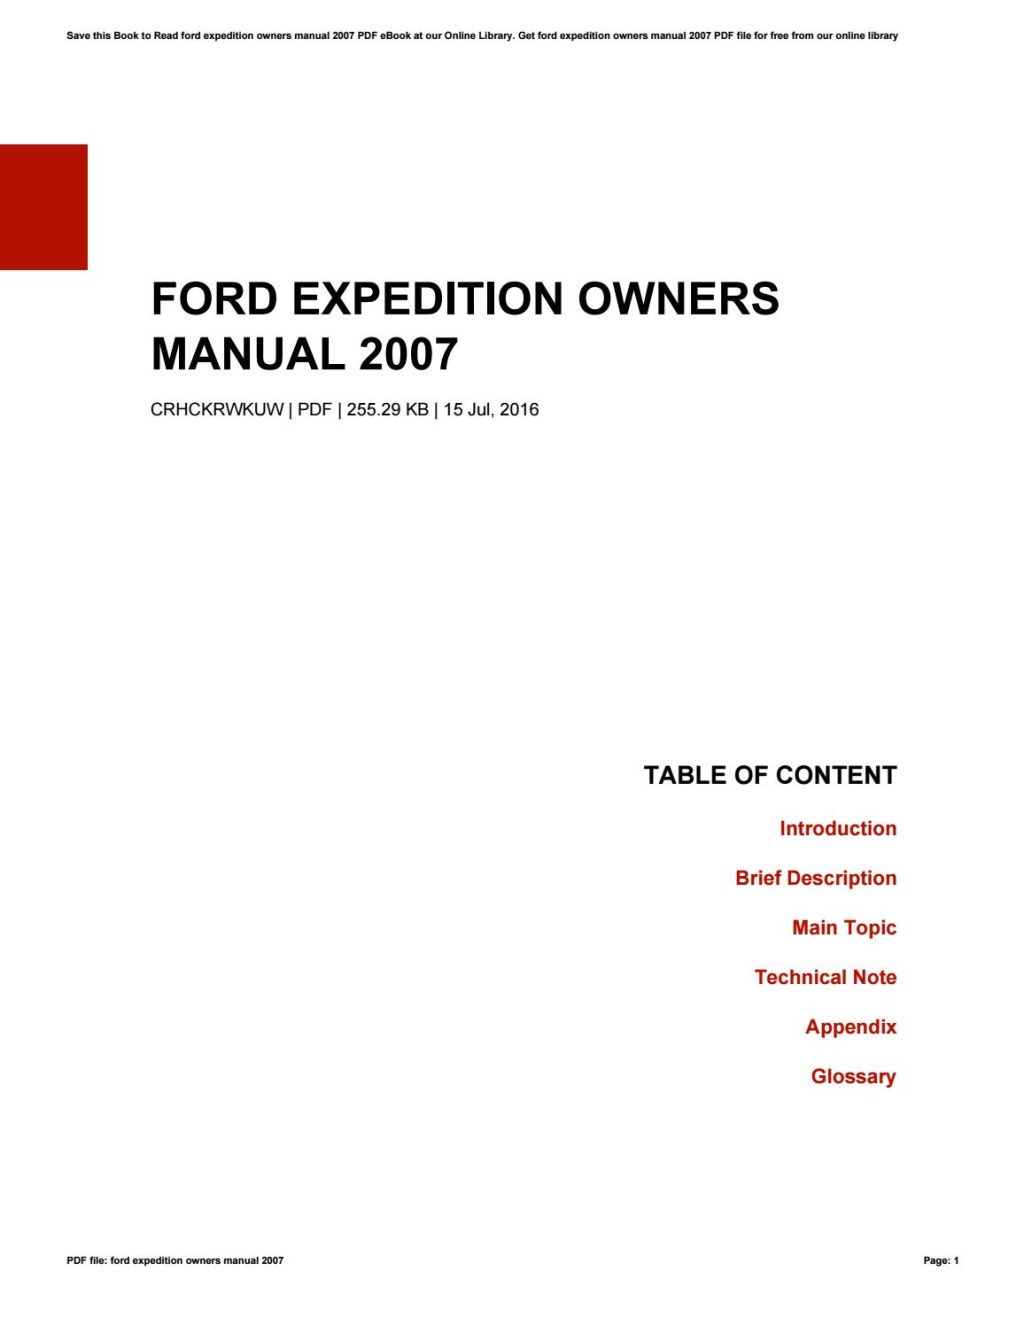 Picture of: Ford expedition owners manual  by MichaelWallace – Issuu